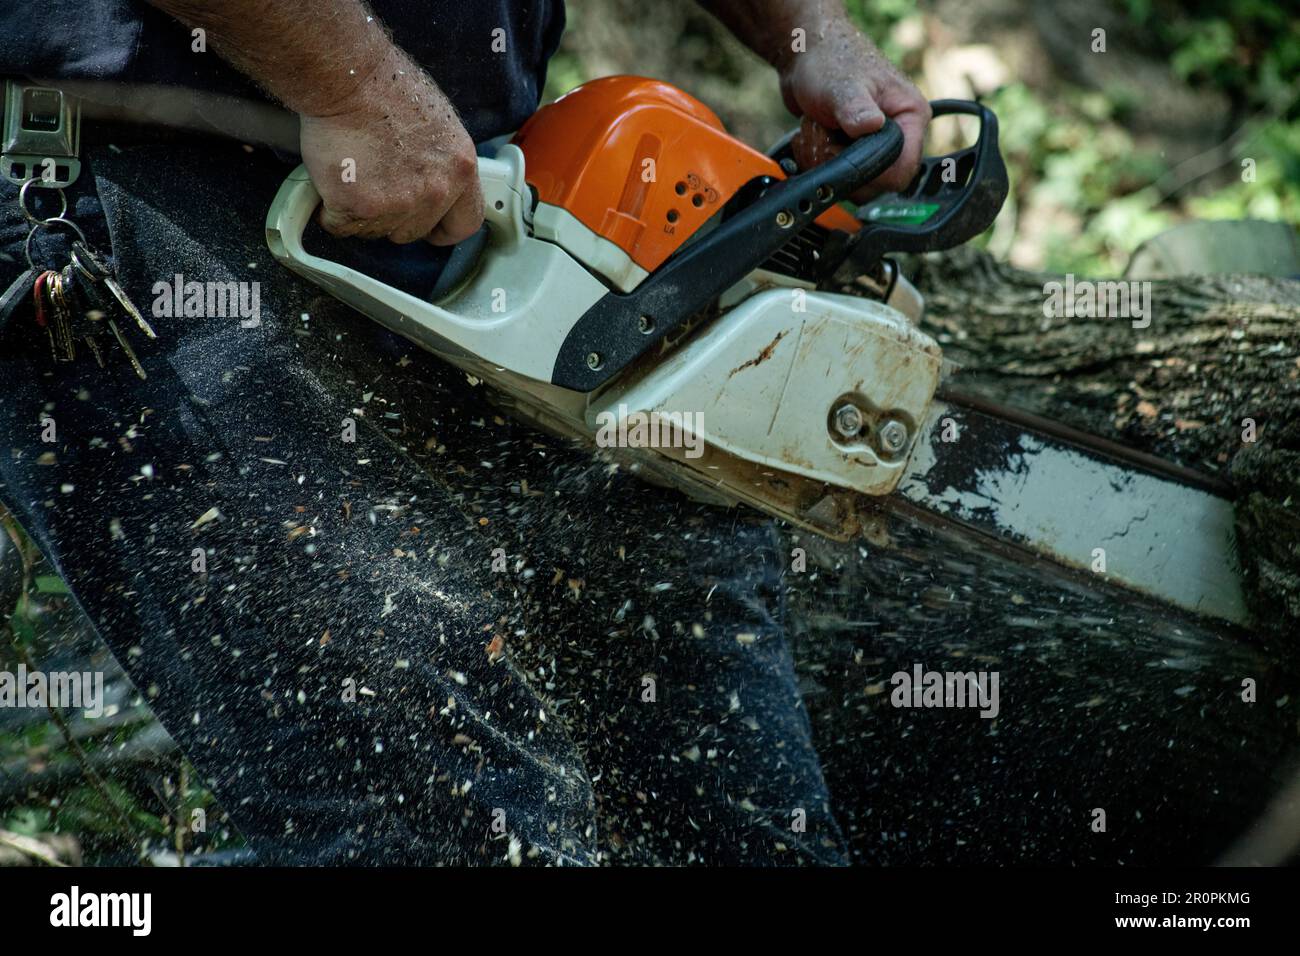 Lumberjack cutting a tree with a chainsaw in the forest. man running chainsaw flinging sawdust. working class. blue-collar. hardworking, tough Stock Photo